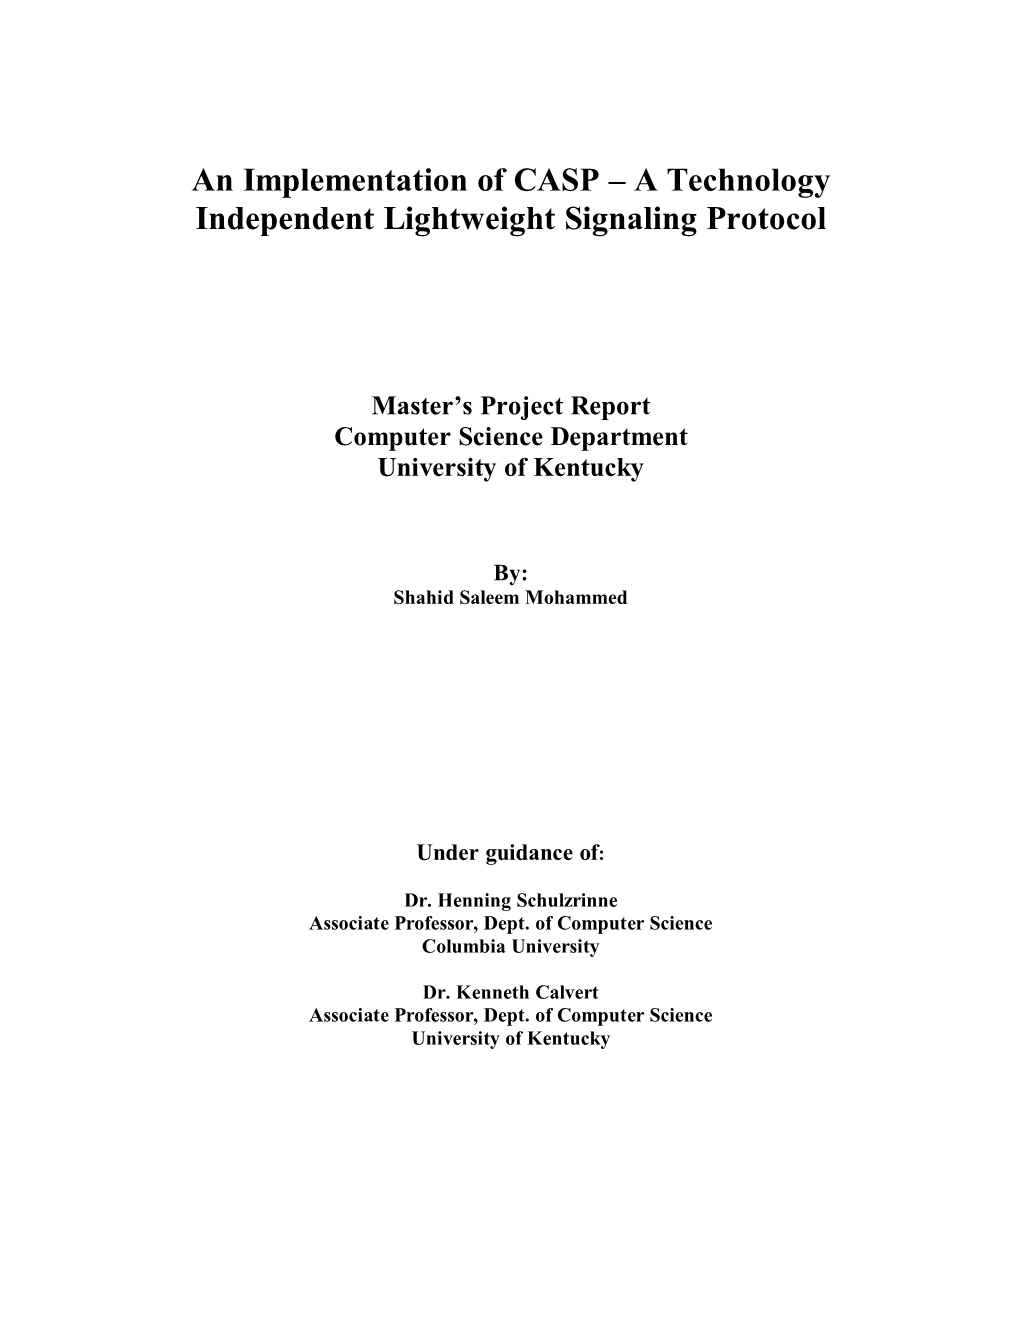 An Implementation of CASP – a Technology Independent Lightweight Signaling Protocol